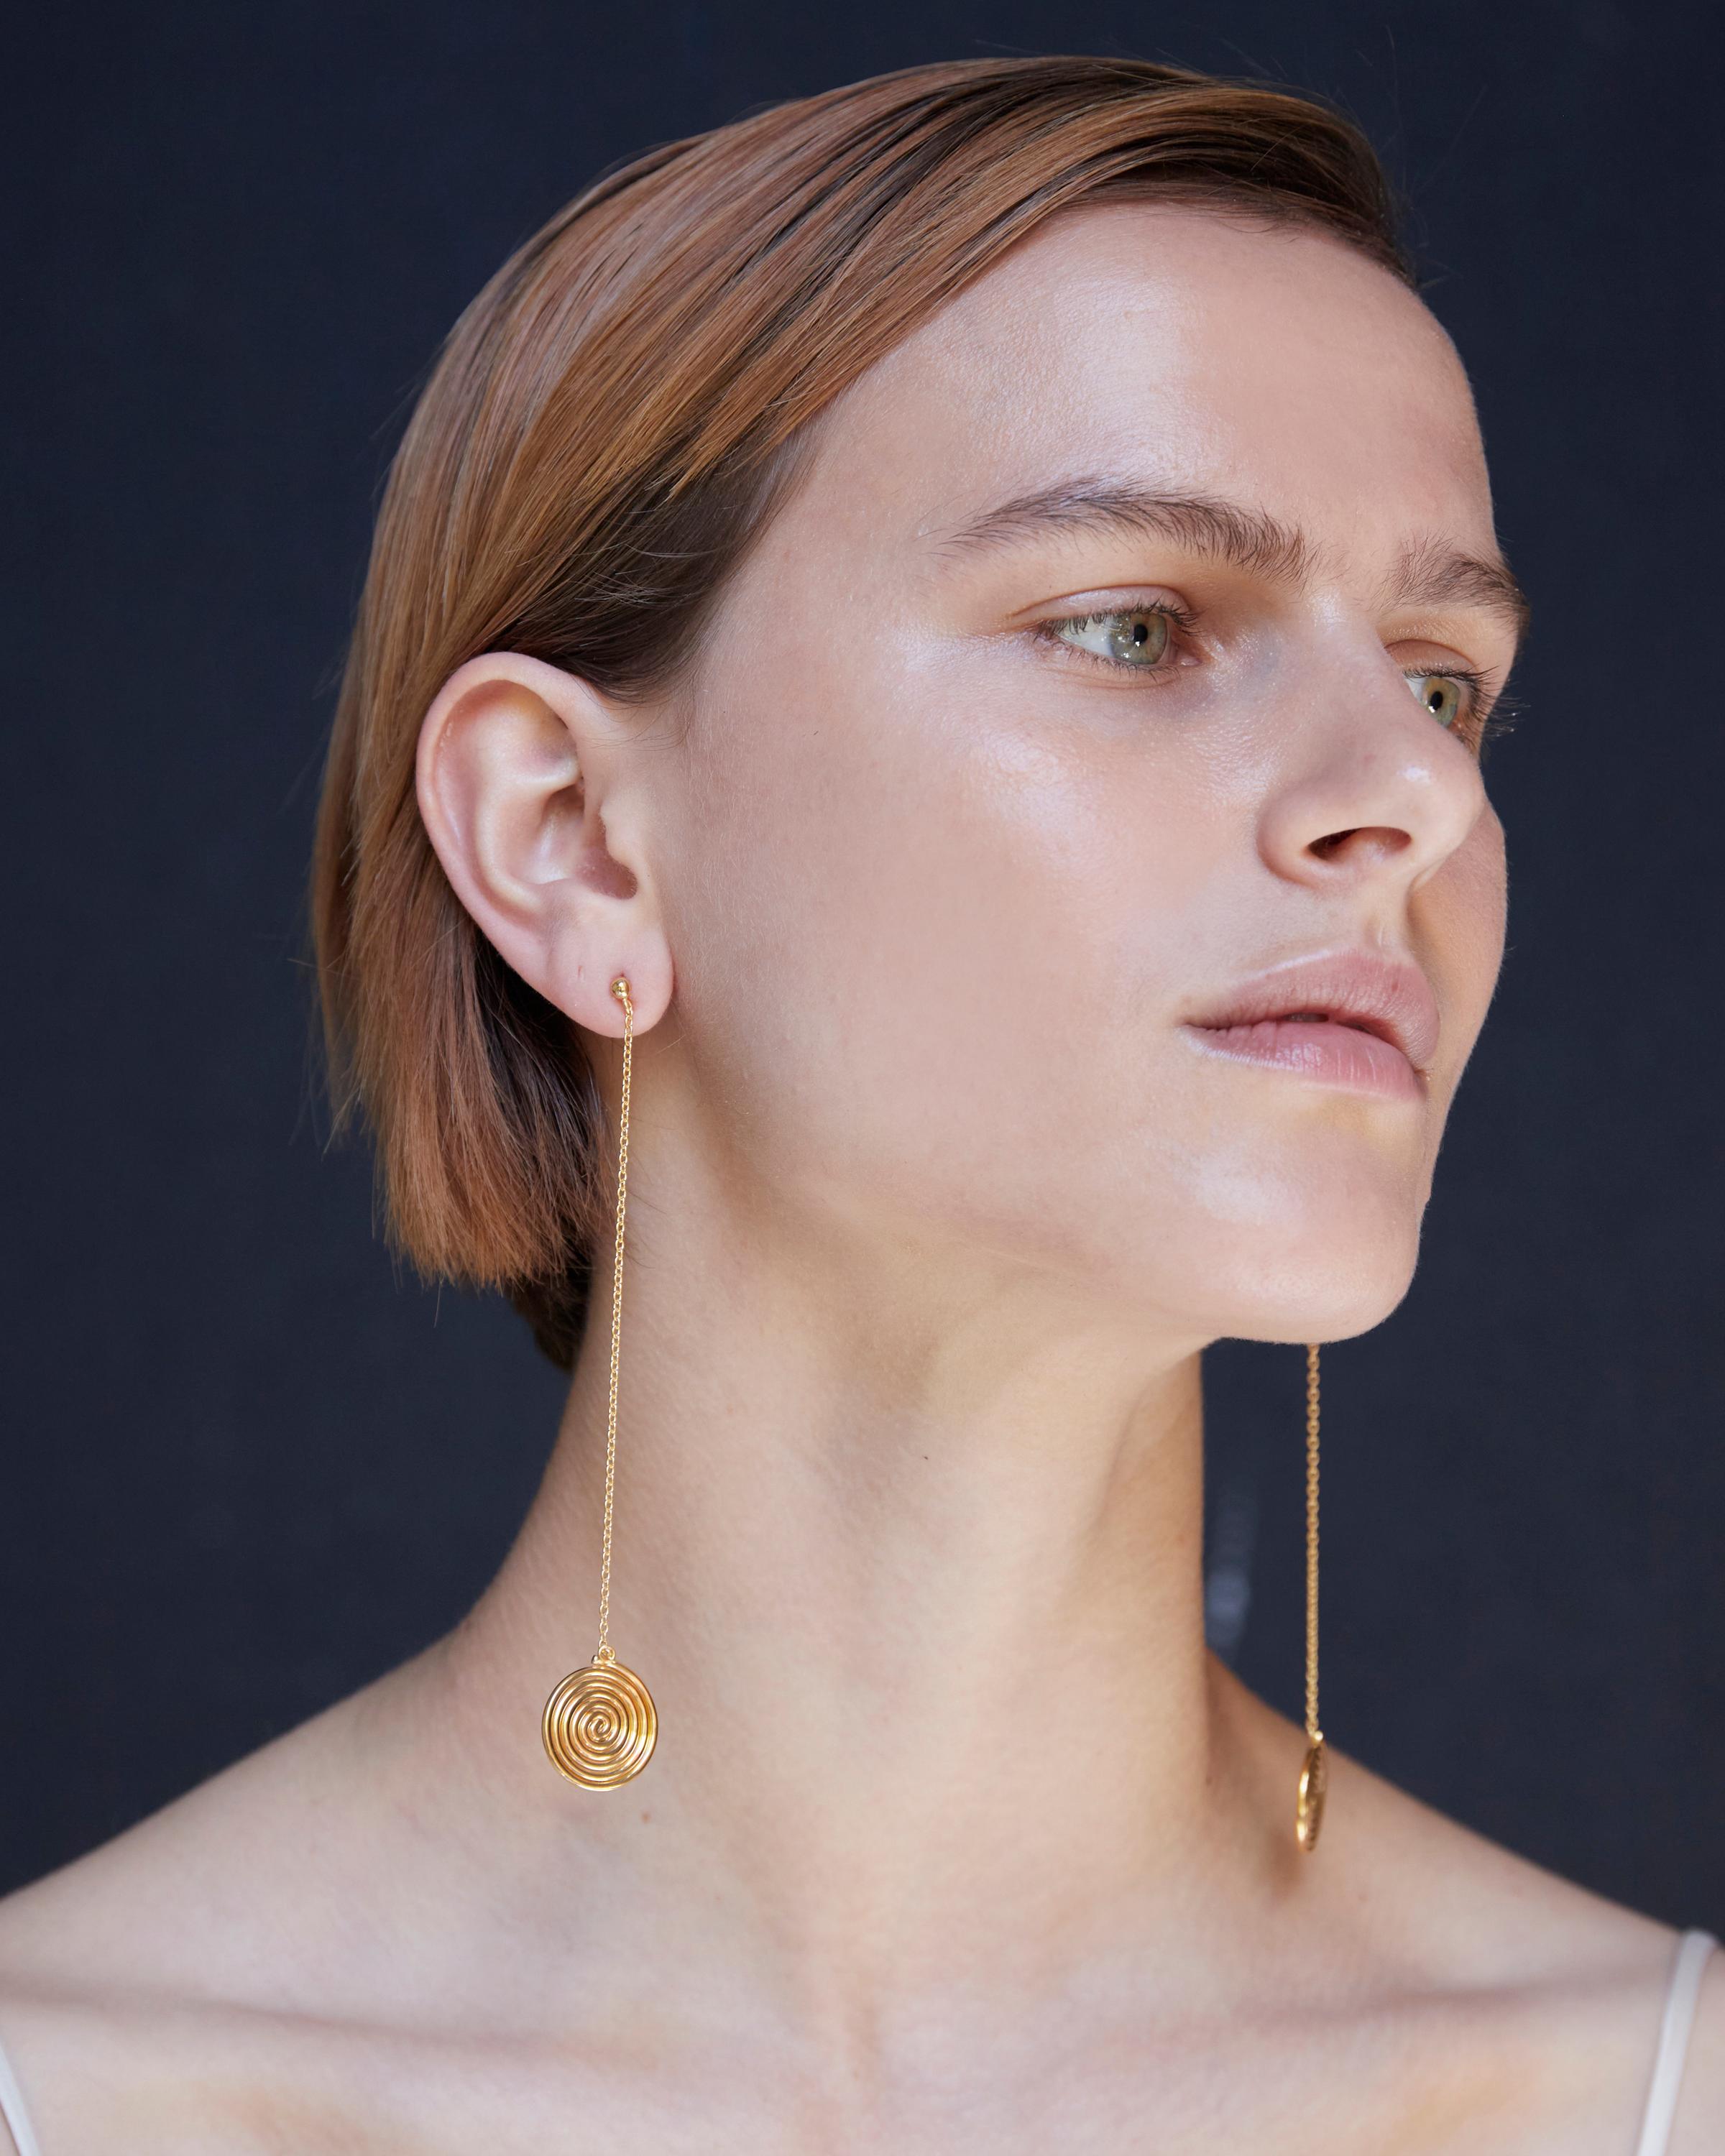 BAR Jewellery, London UK, NEVERENDING ROAD EARRINGS, Gold Plated

The Neverending road earrings are a playful drop style, inspired by the work of artists Terry Frost and Alexander Calder. These earrings are best worn with the hair tied back